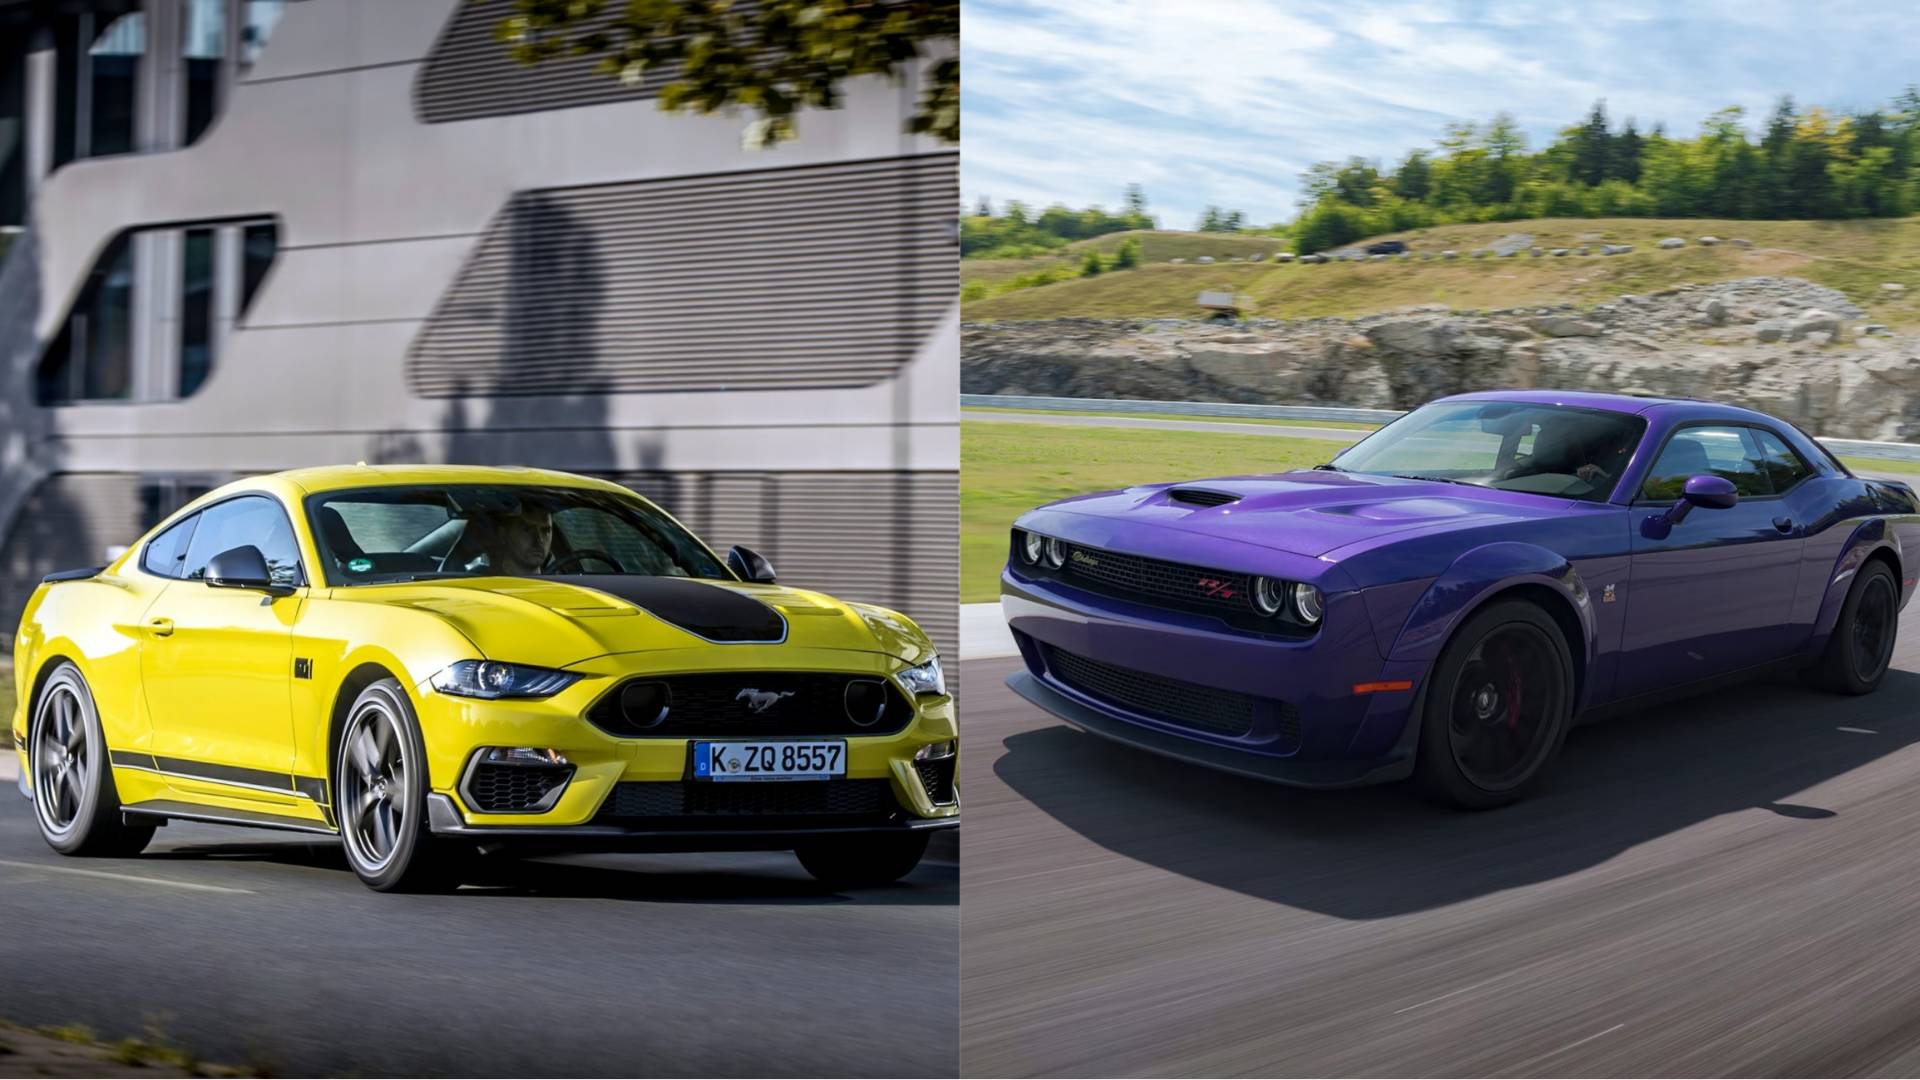 DubiCompare: Ford Mustang v/s Dodge Challenger: The Ultimate American Muscle Car Duel